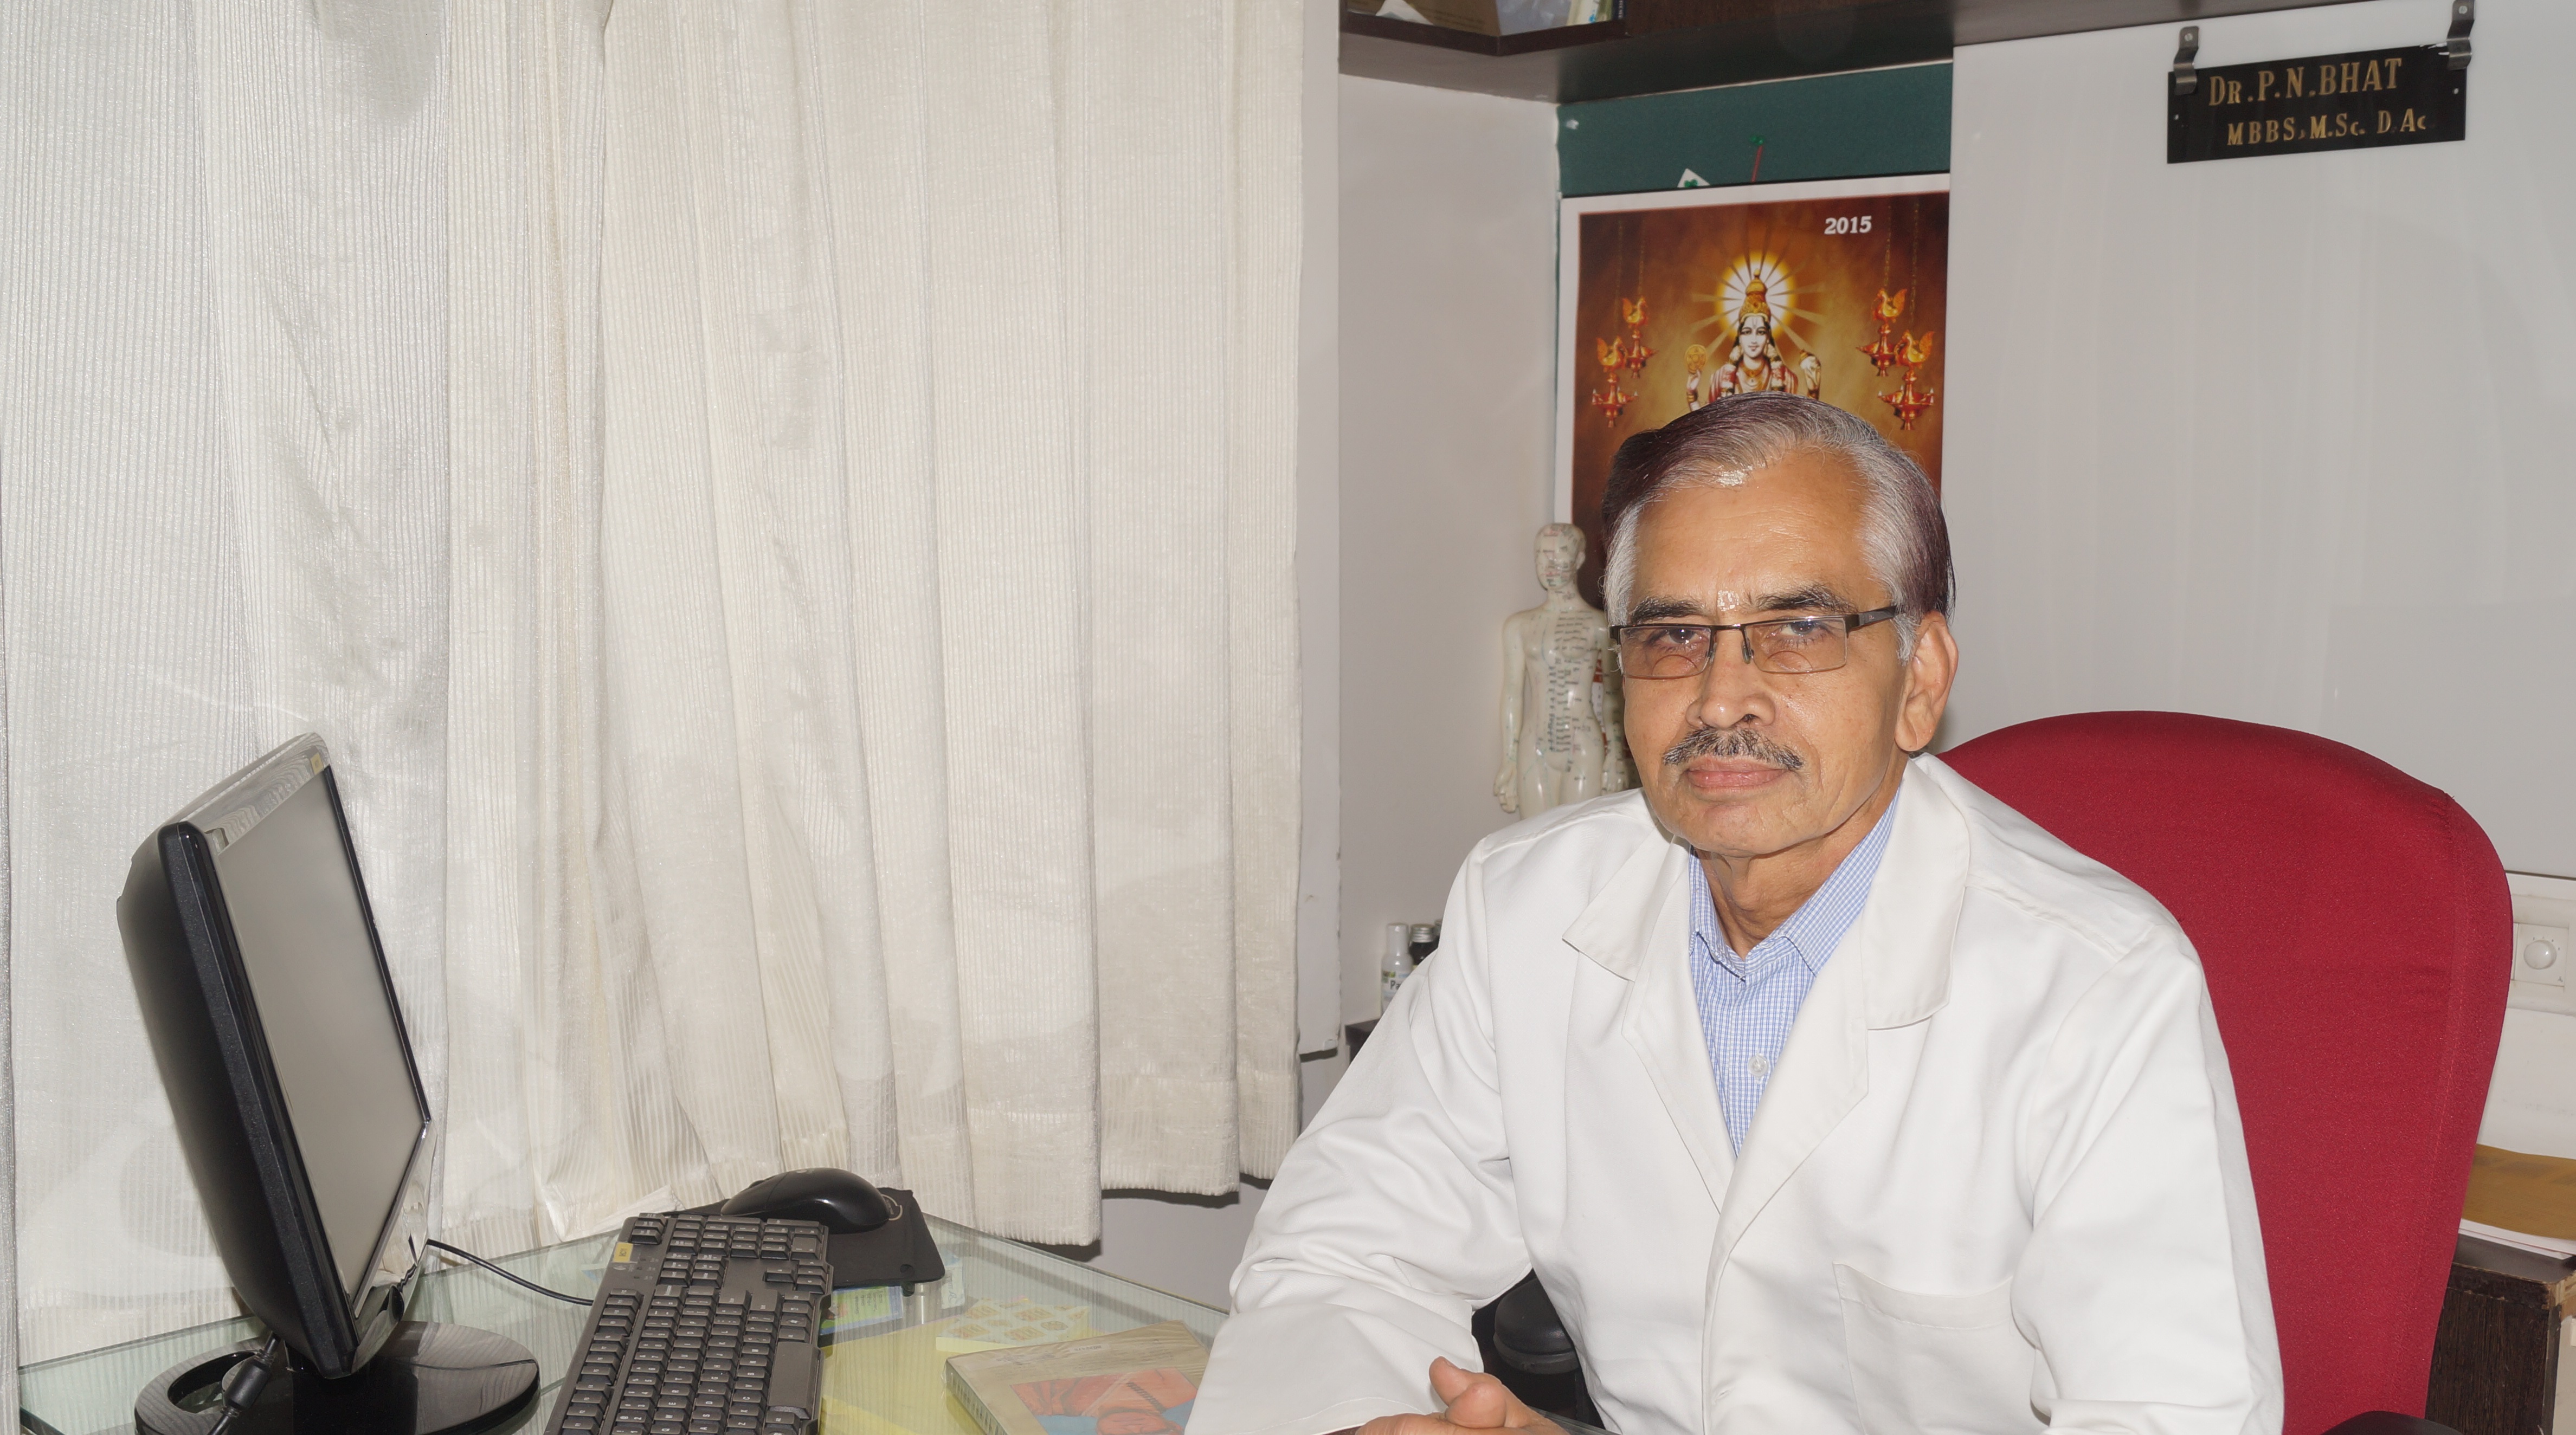 Dr.P N Bhat